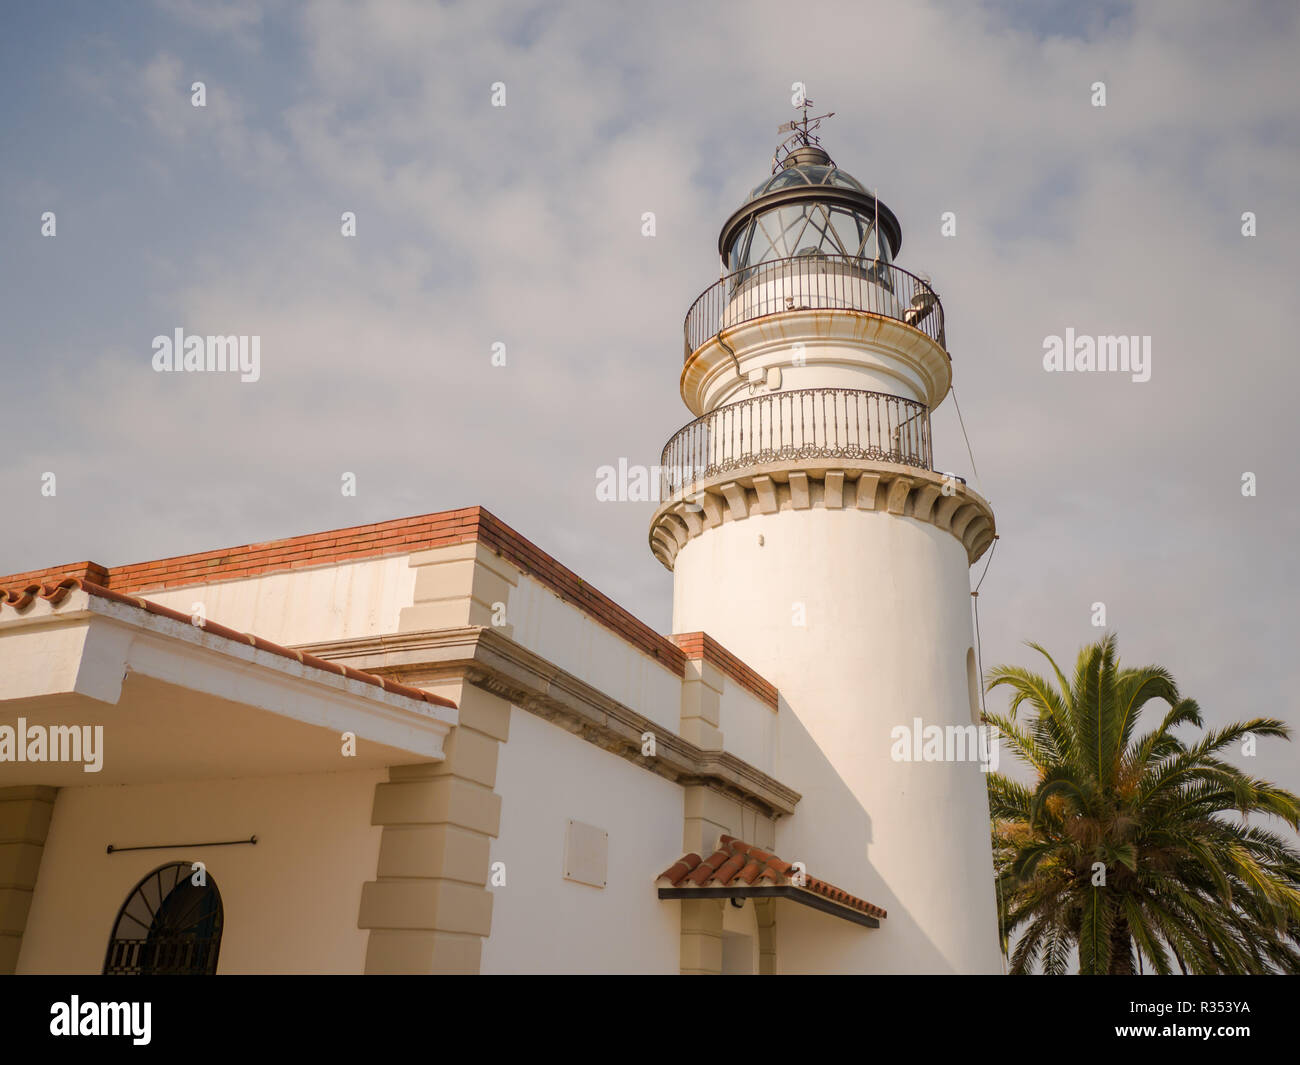 Calella Lighthouse is active lighthouse situated in coastal town of Calella in Costa del Maresme, Catalonia, Spain Stock Photo